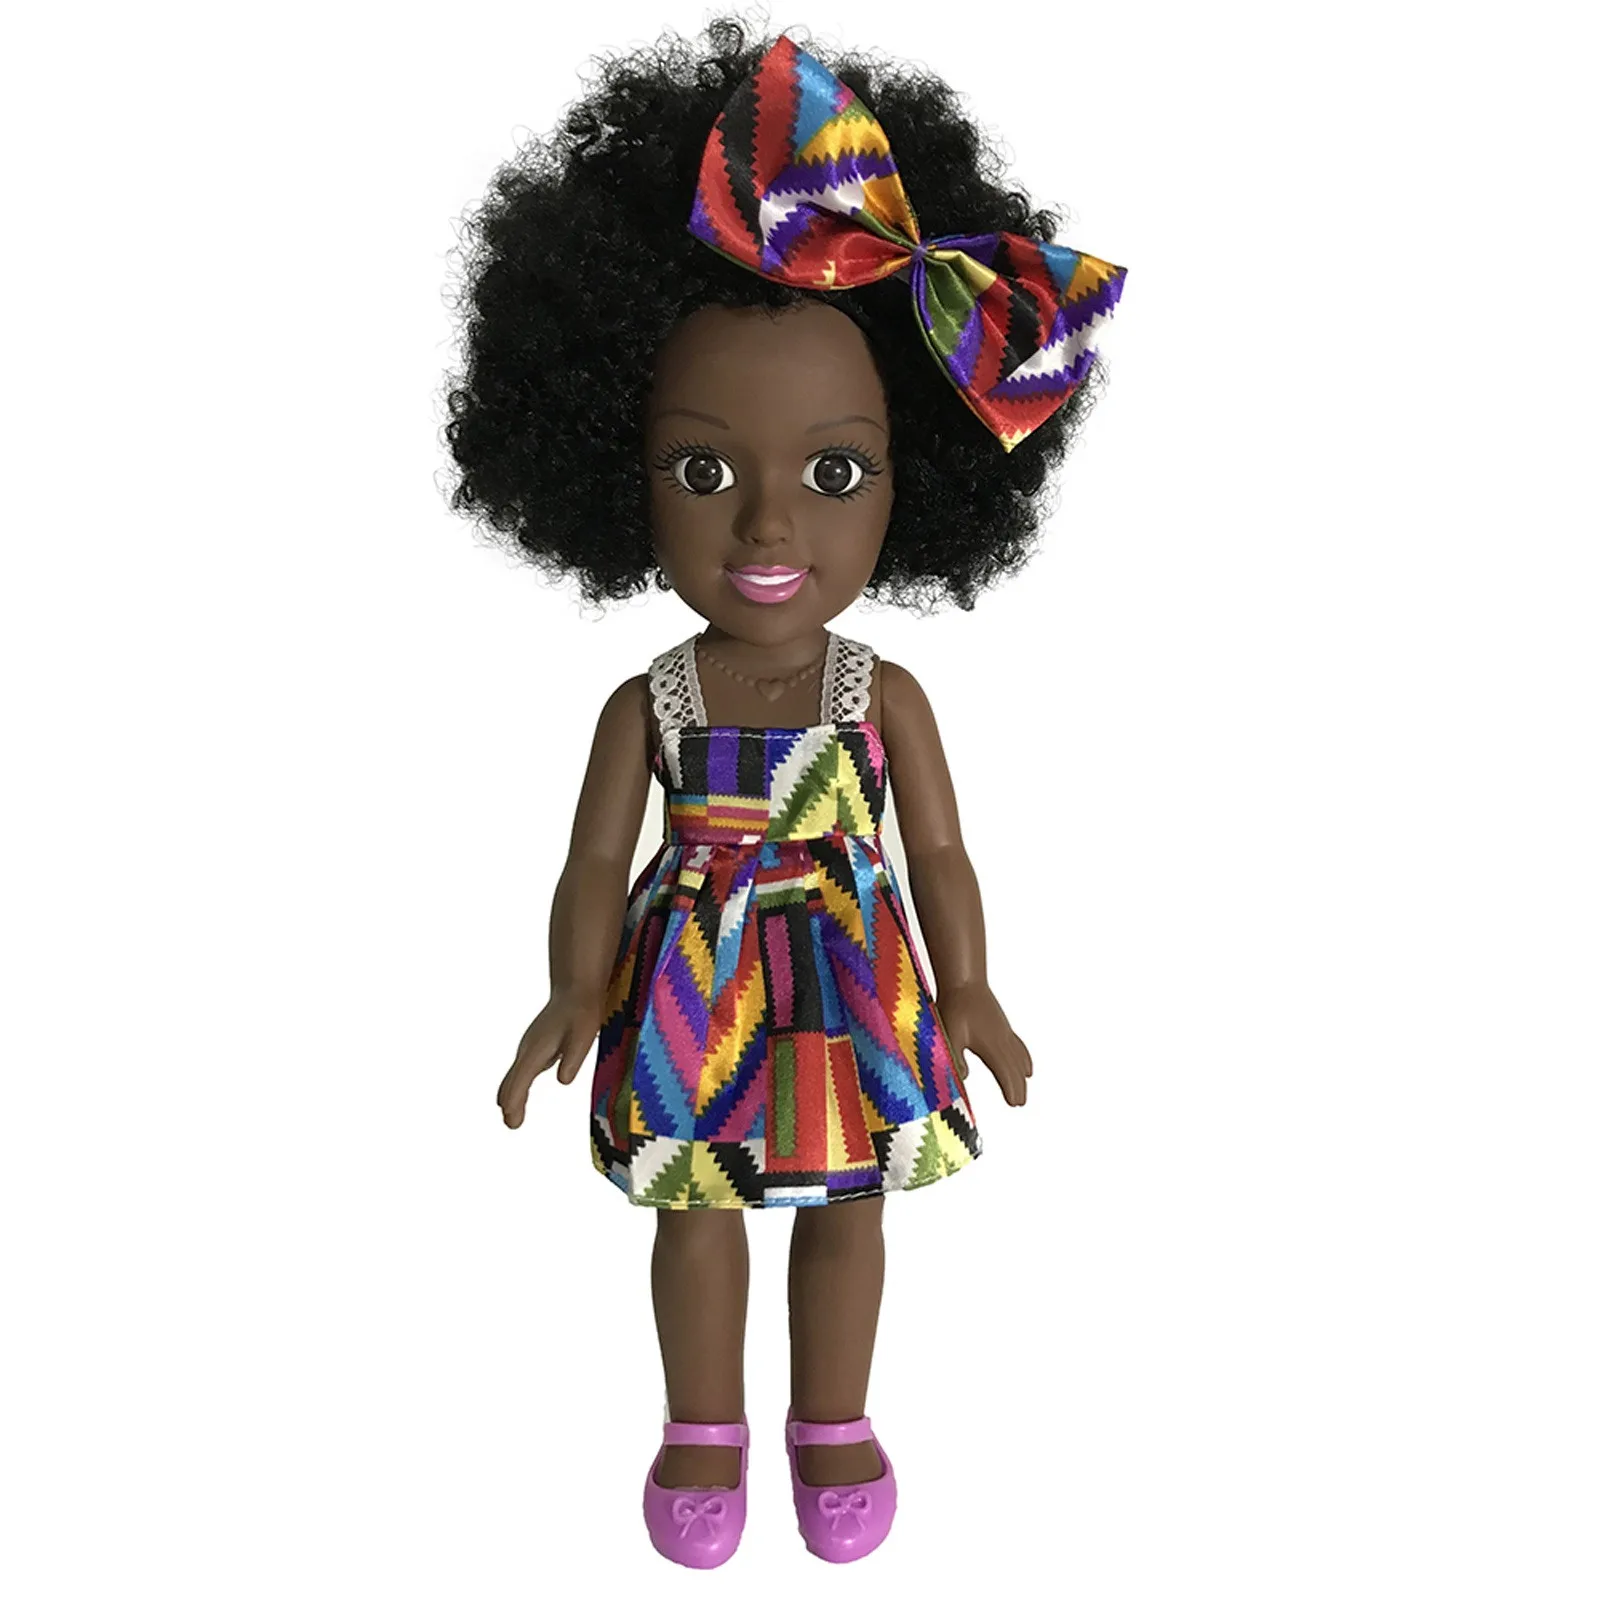 2022 New Baby Dolls For Girls Baby African Doll Toy Black Doll Best Gift Toy Hot Sale Baby Dolls For Kids Toys